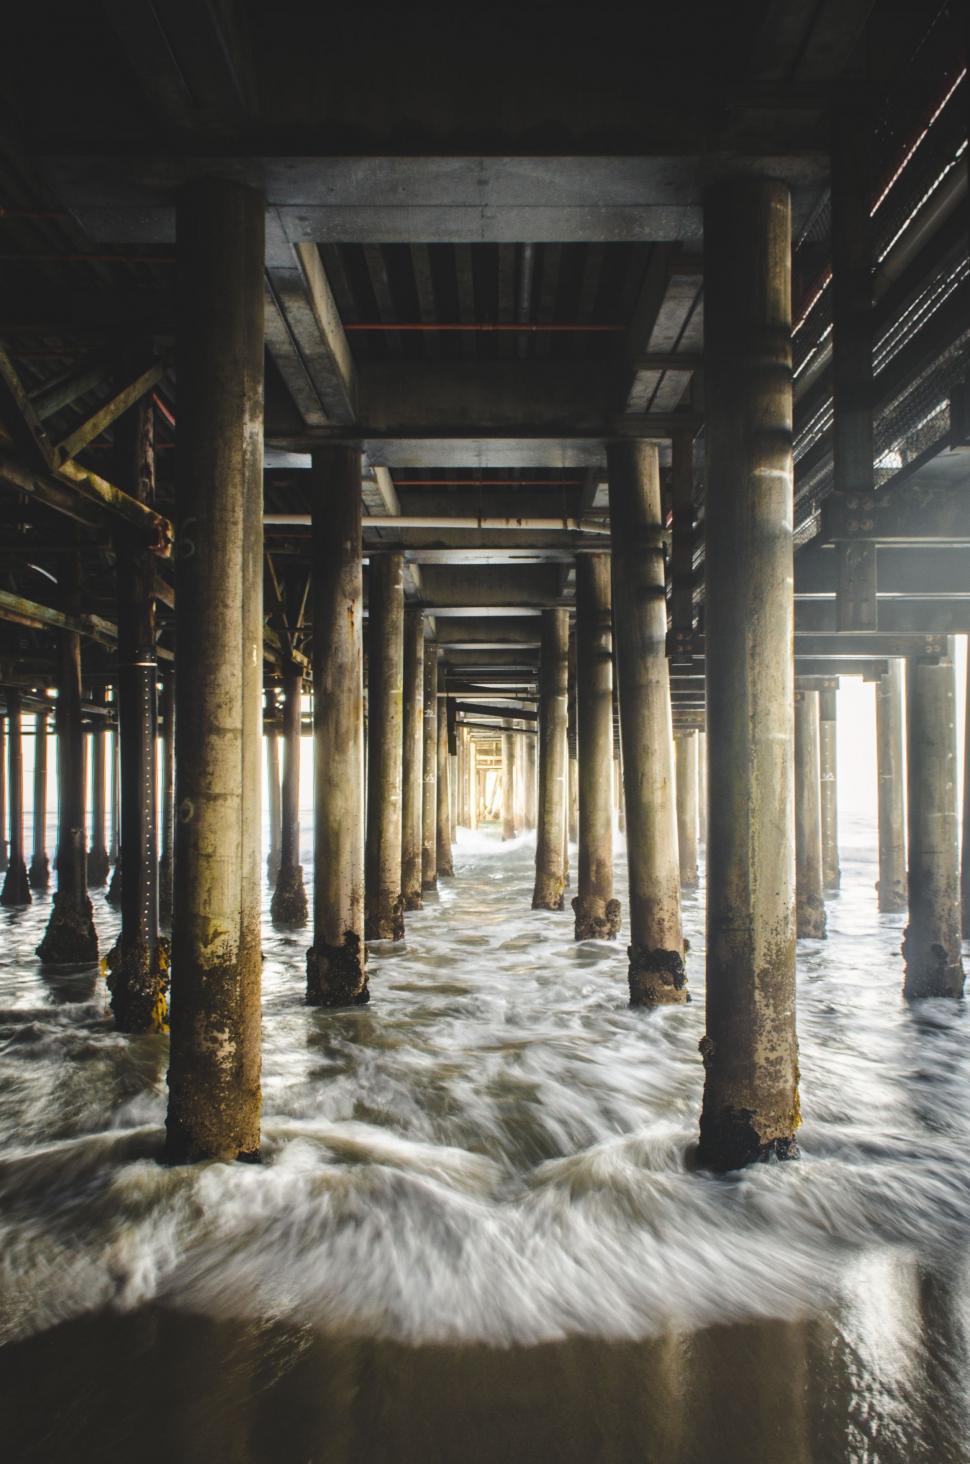 Free Image of Pier Filled With Water Under a Bridge 